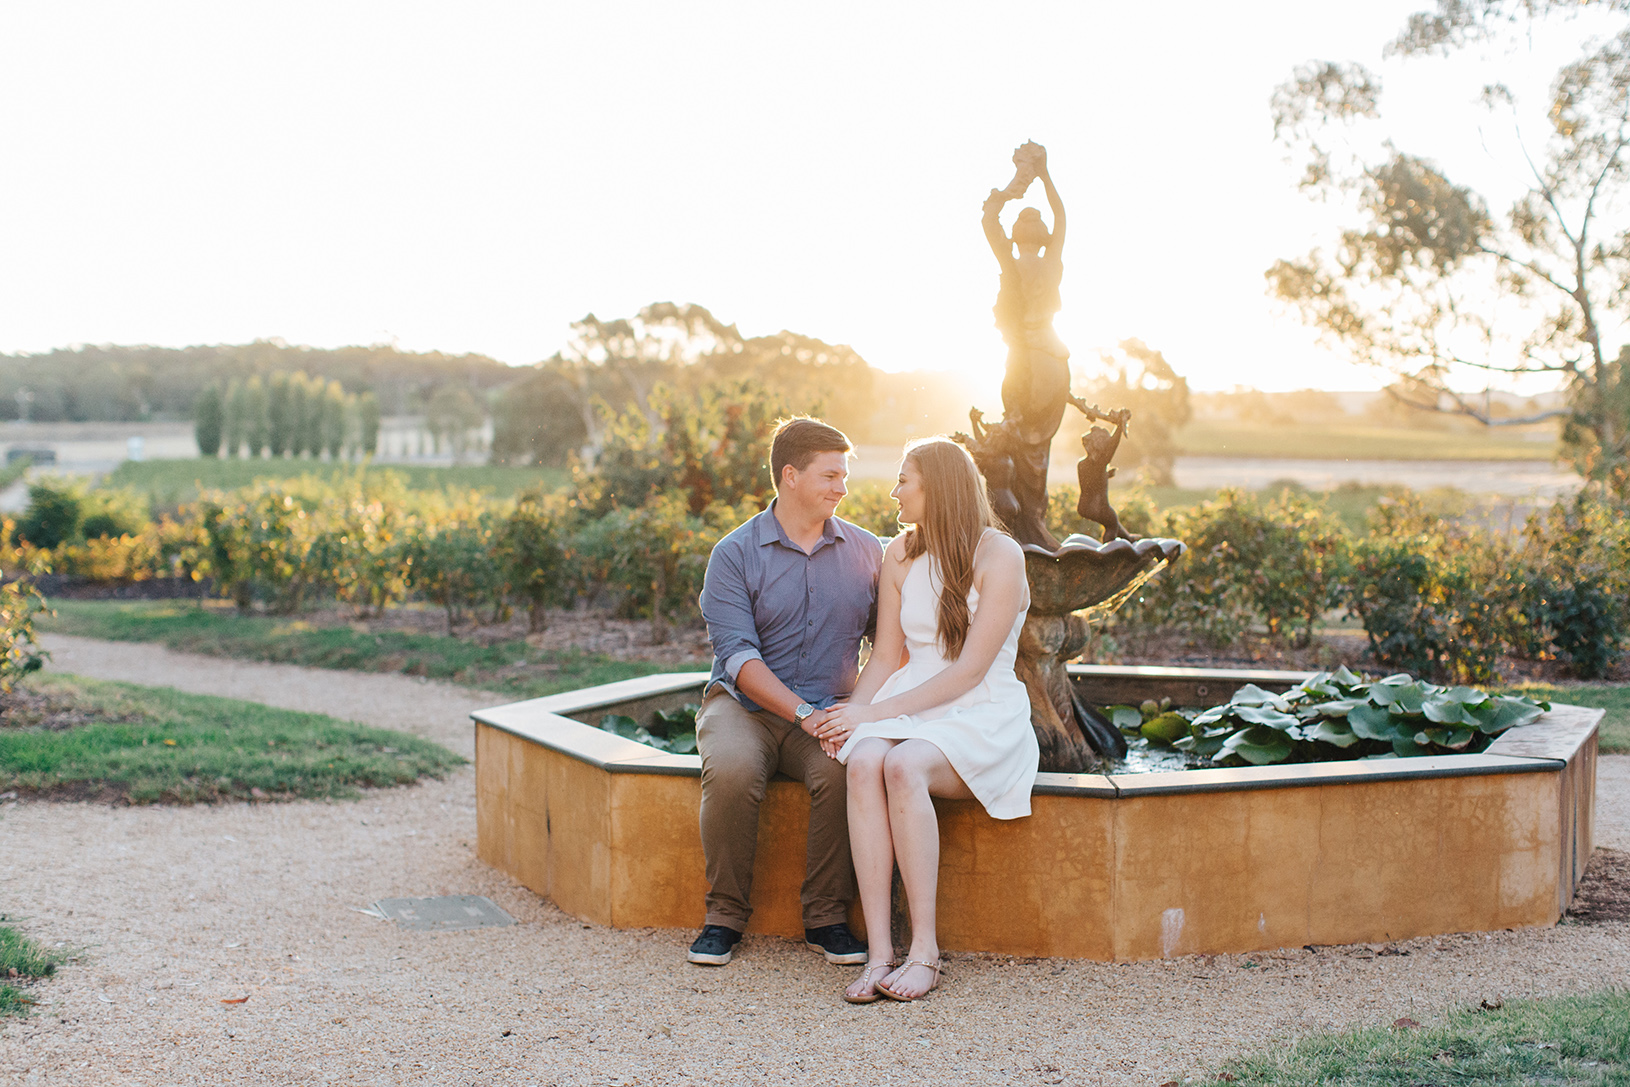 019 Engagement Photographer Adelaide - Year in Review 2016.jpg